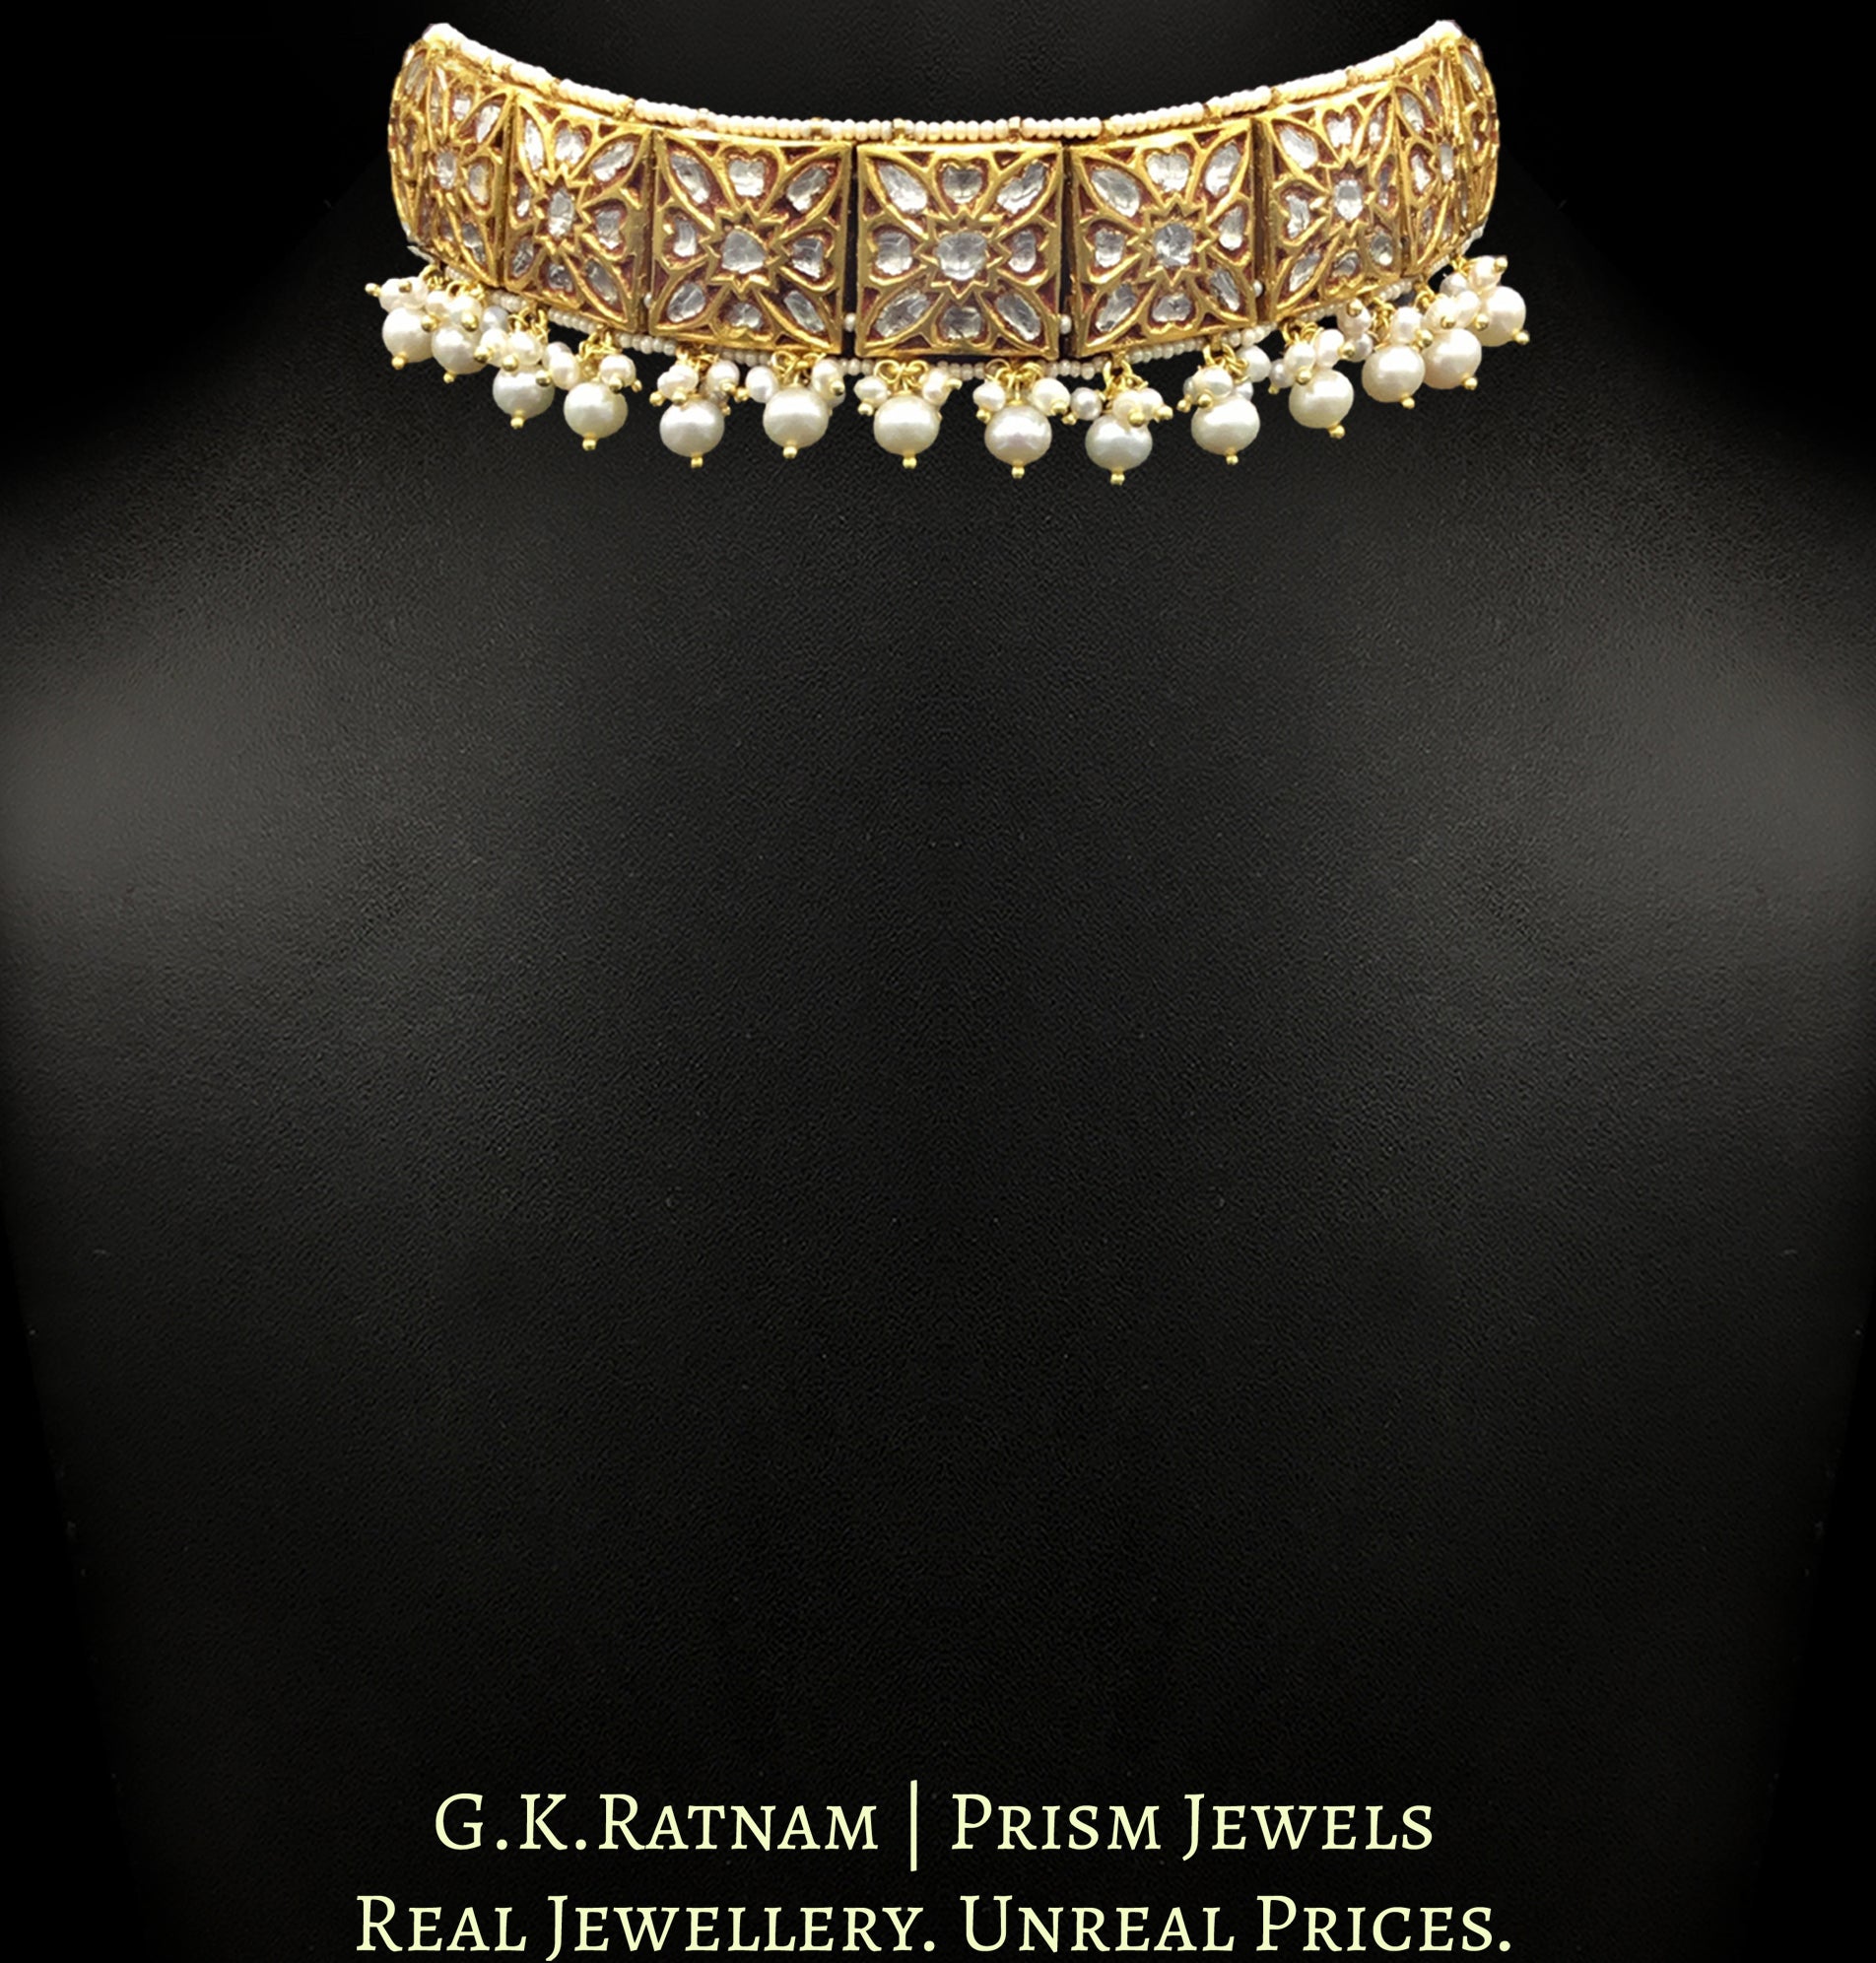 23k Gold and Diamond Polki Choker Necklace with antiqued hyderabadi pearls and corals - G. K. Ratnam